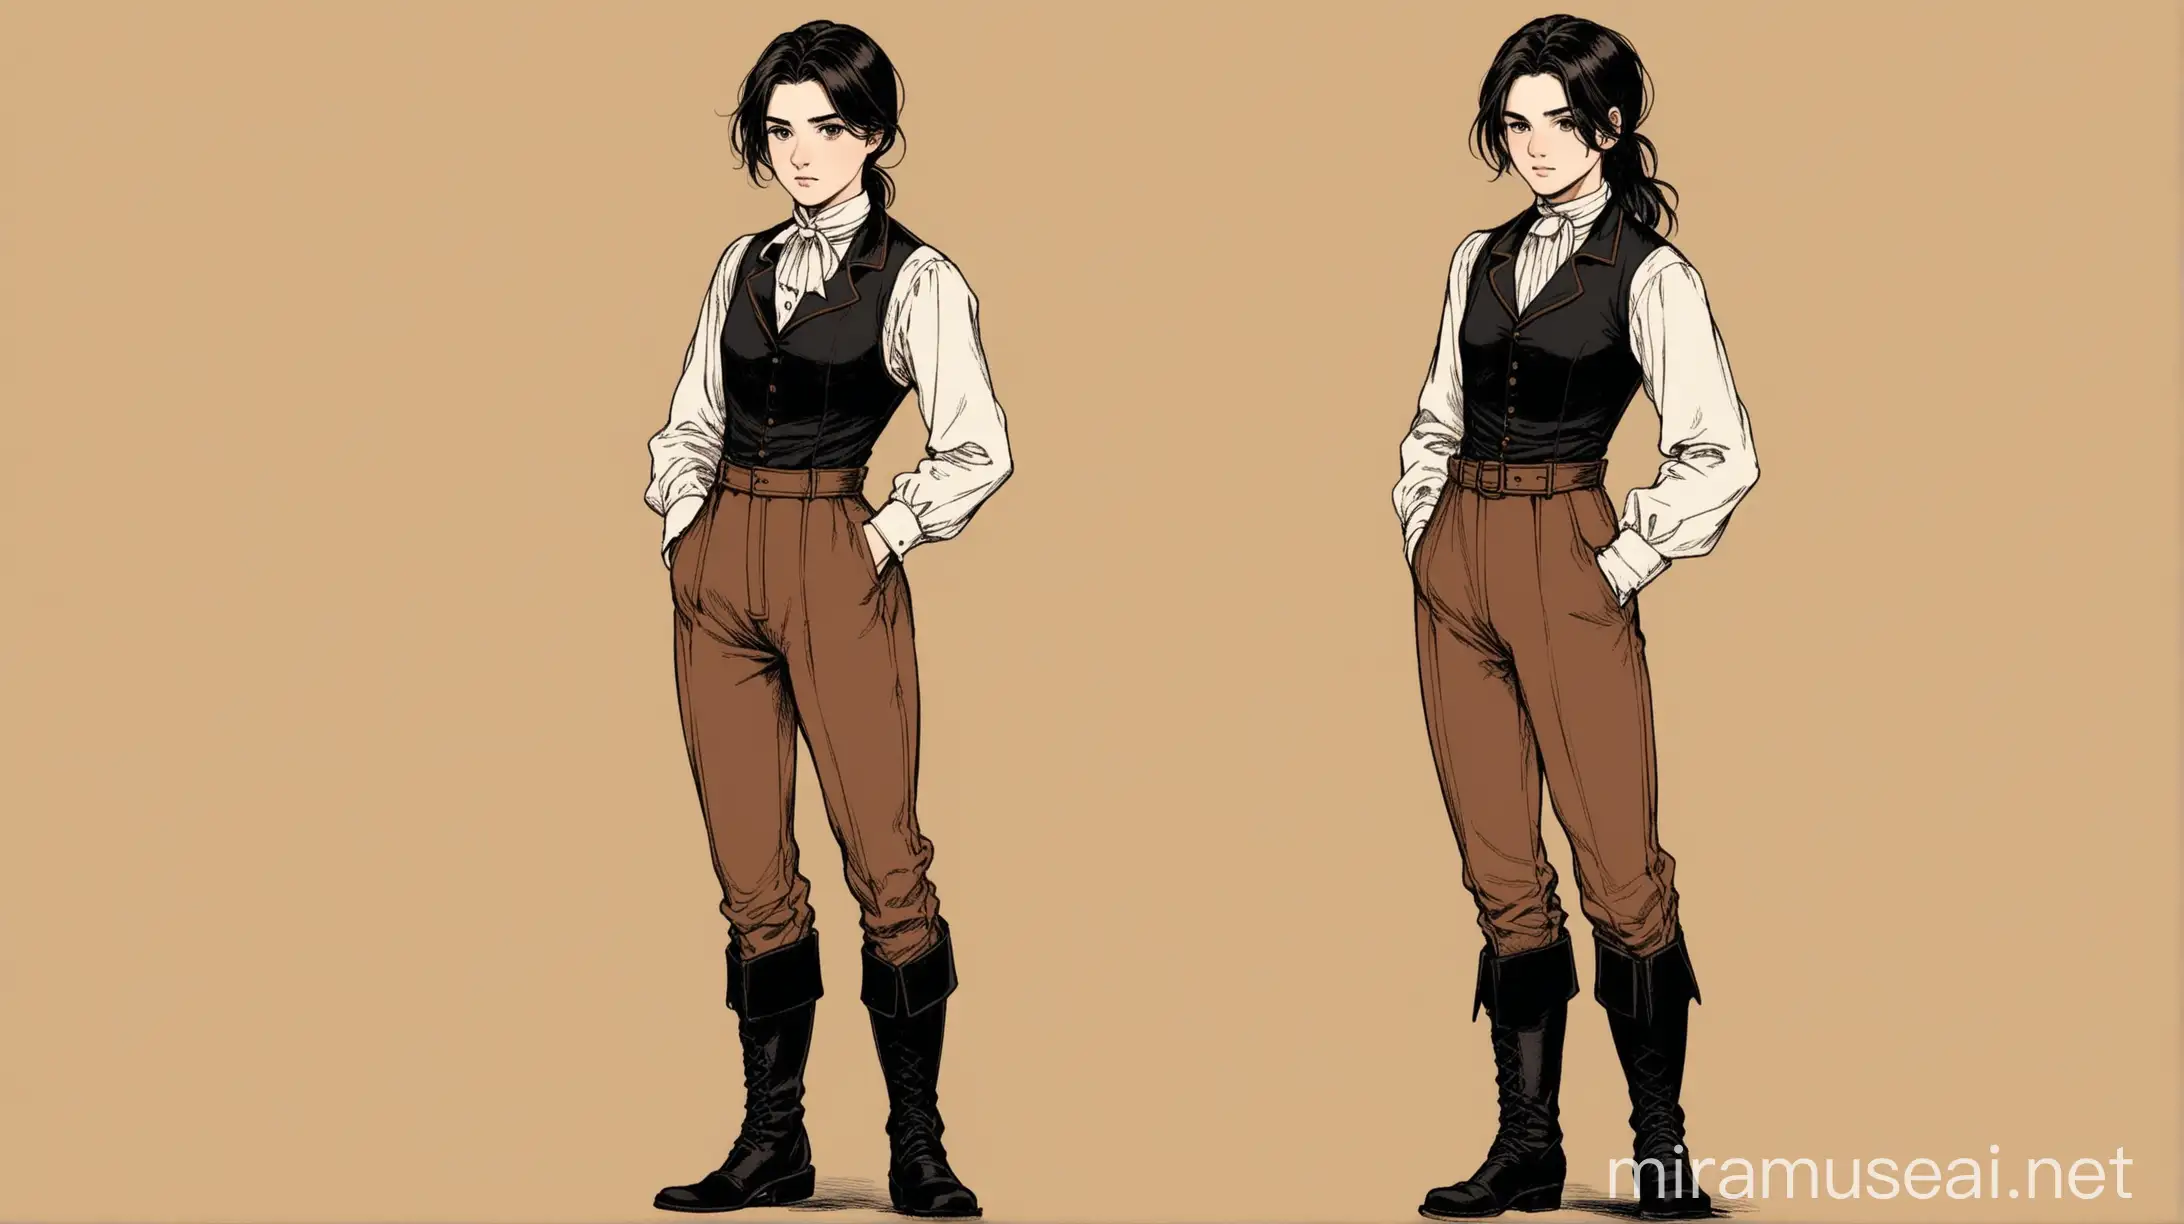 19th century, girl pretending to be a man, black hair, pony tail, androgynous face, brown pants, black leather boots, poet shirt